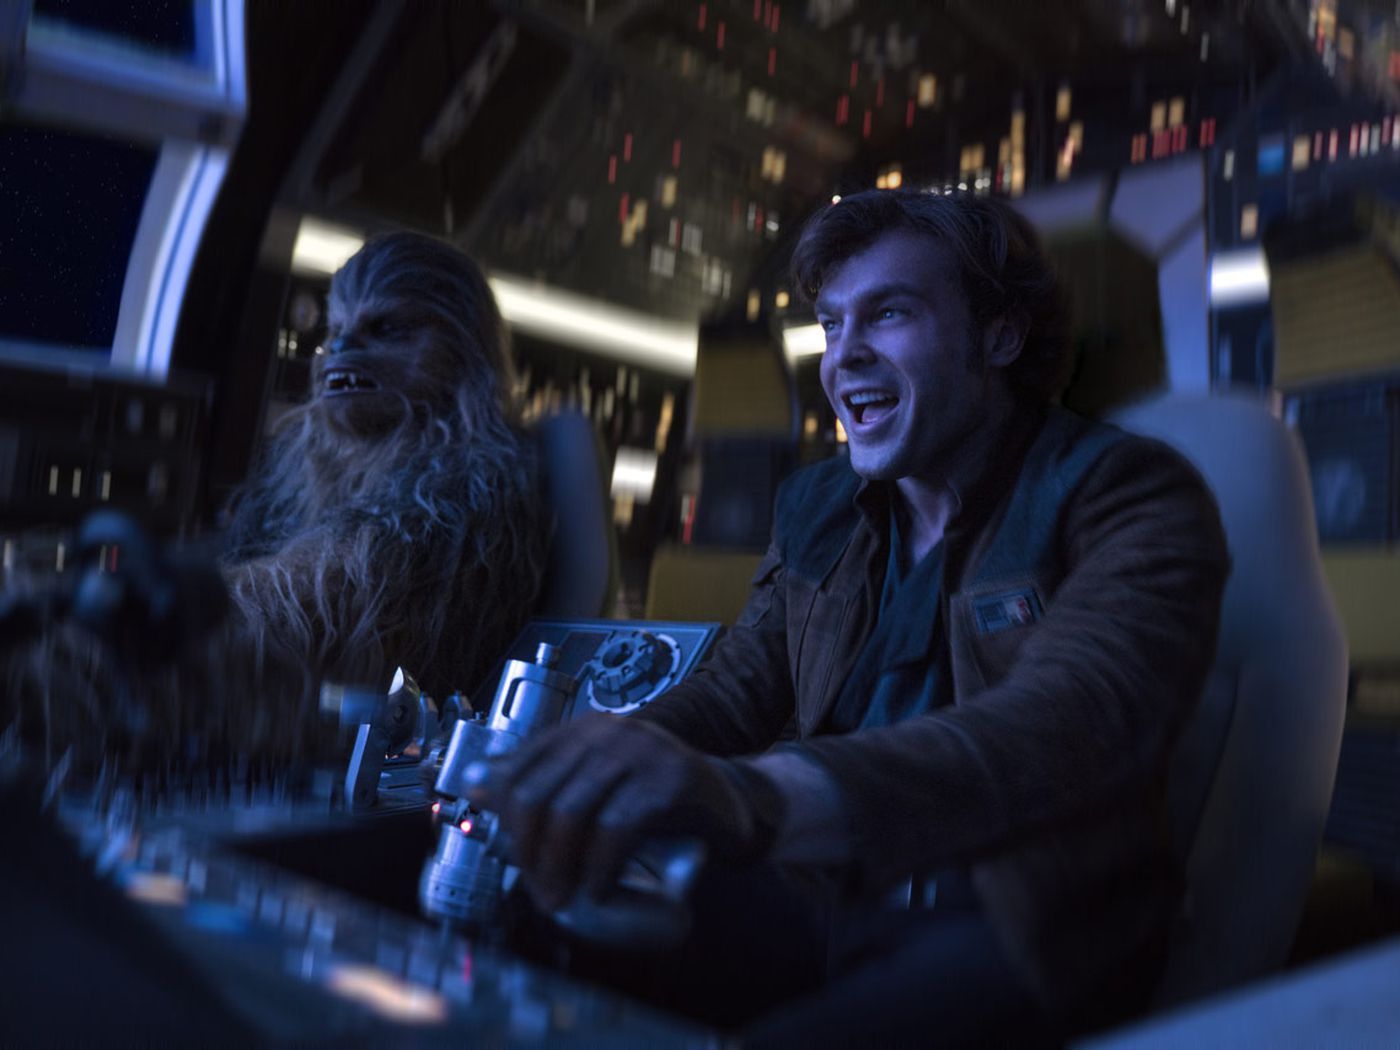 Han finds out Chewbacca's age in new Solo: A Star Wars Story